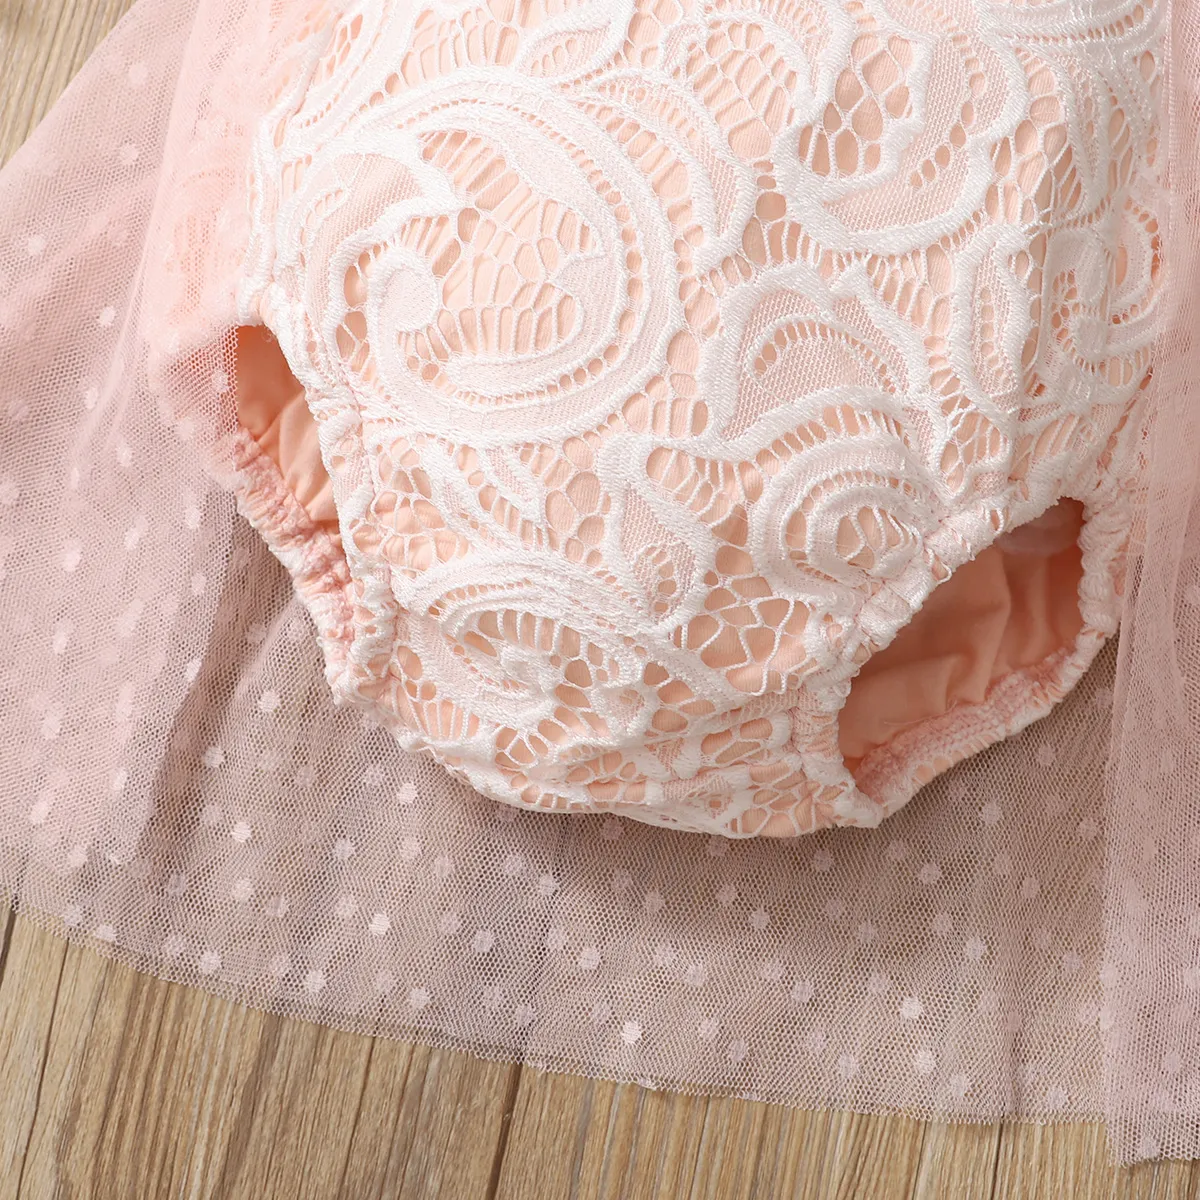 Baby Pink Floral Lace and Mesh Splicing Sleeveless Letter Romper Party Dress Pink big image 1